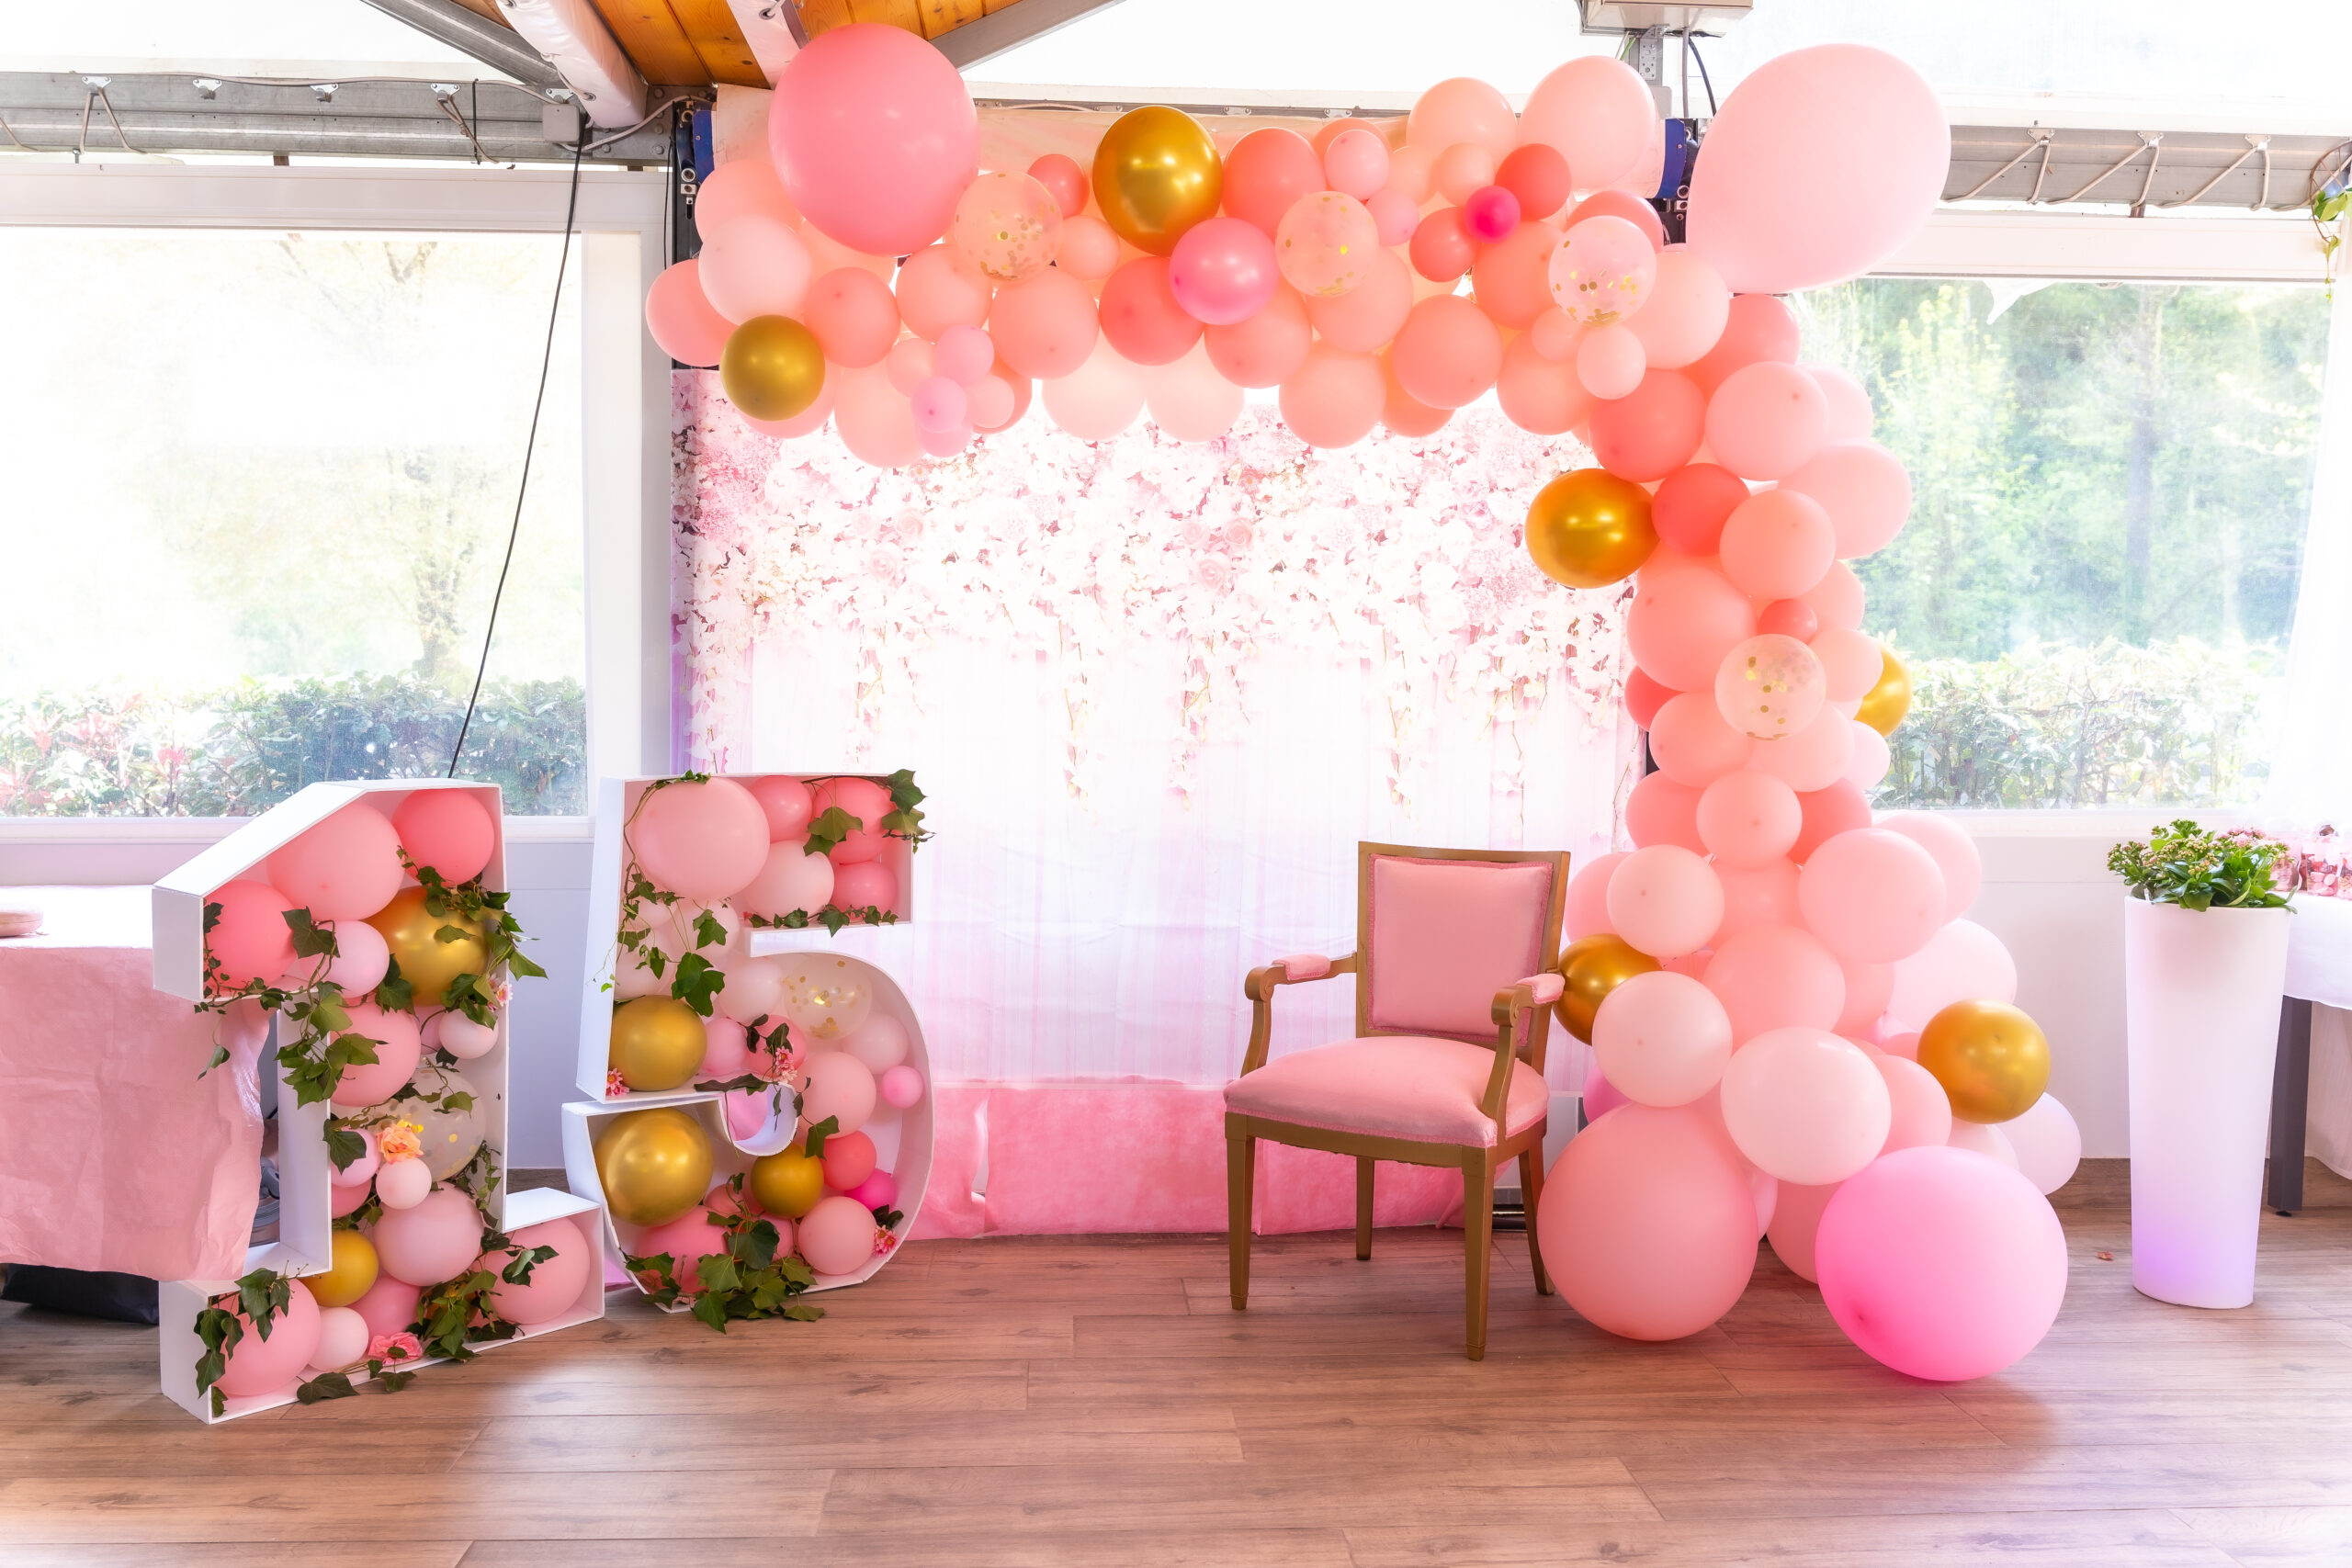 Quick and easy: how to hang your balloon garland